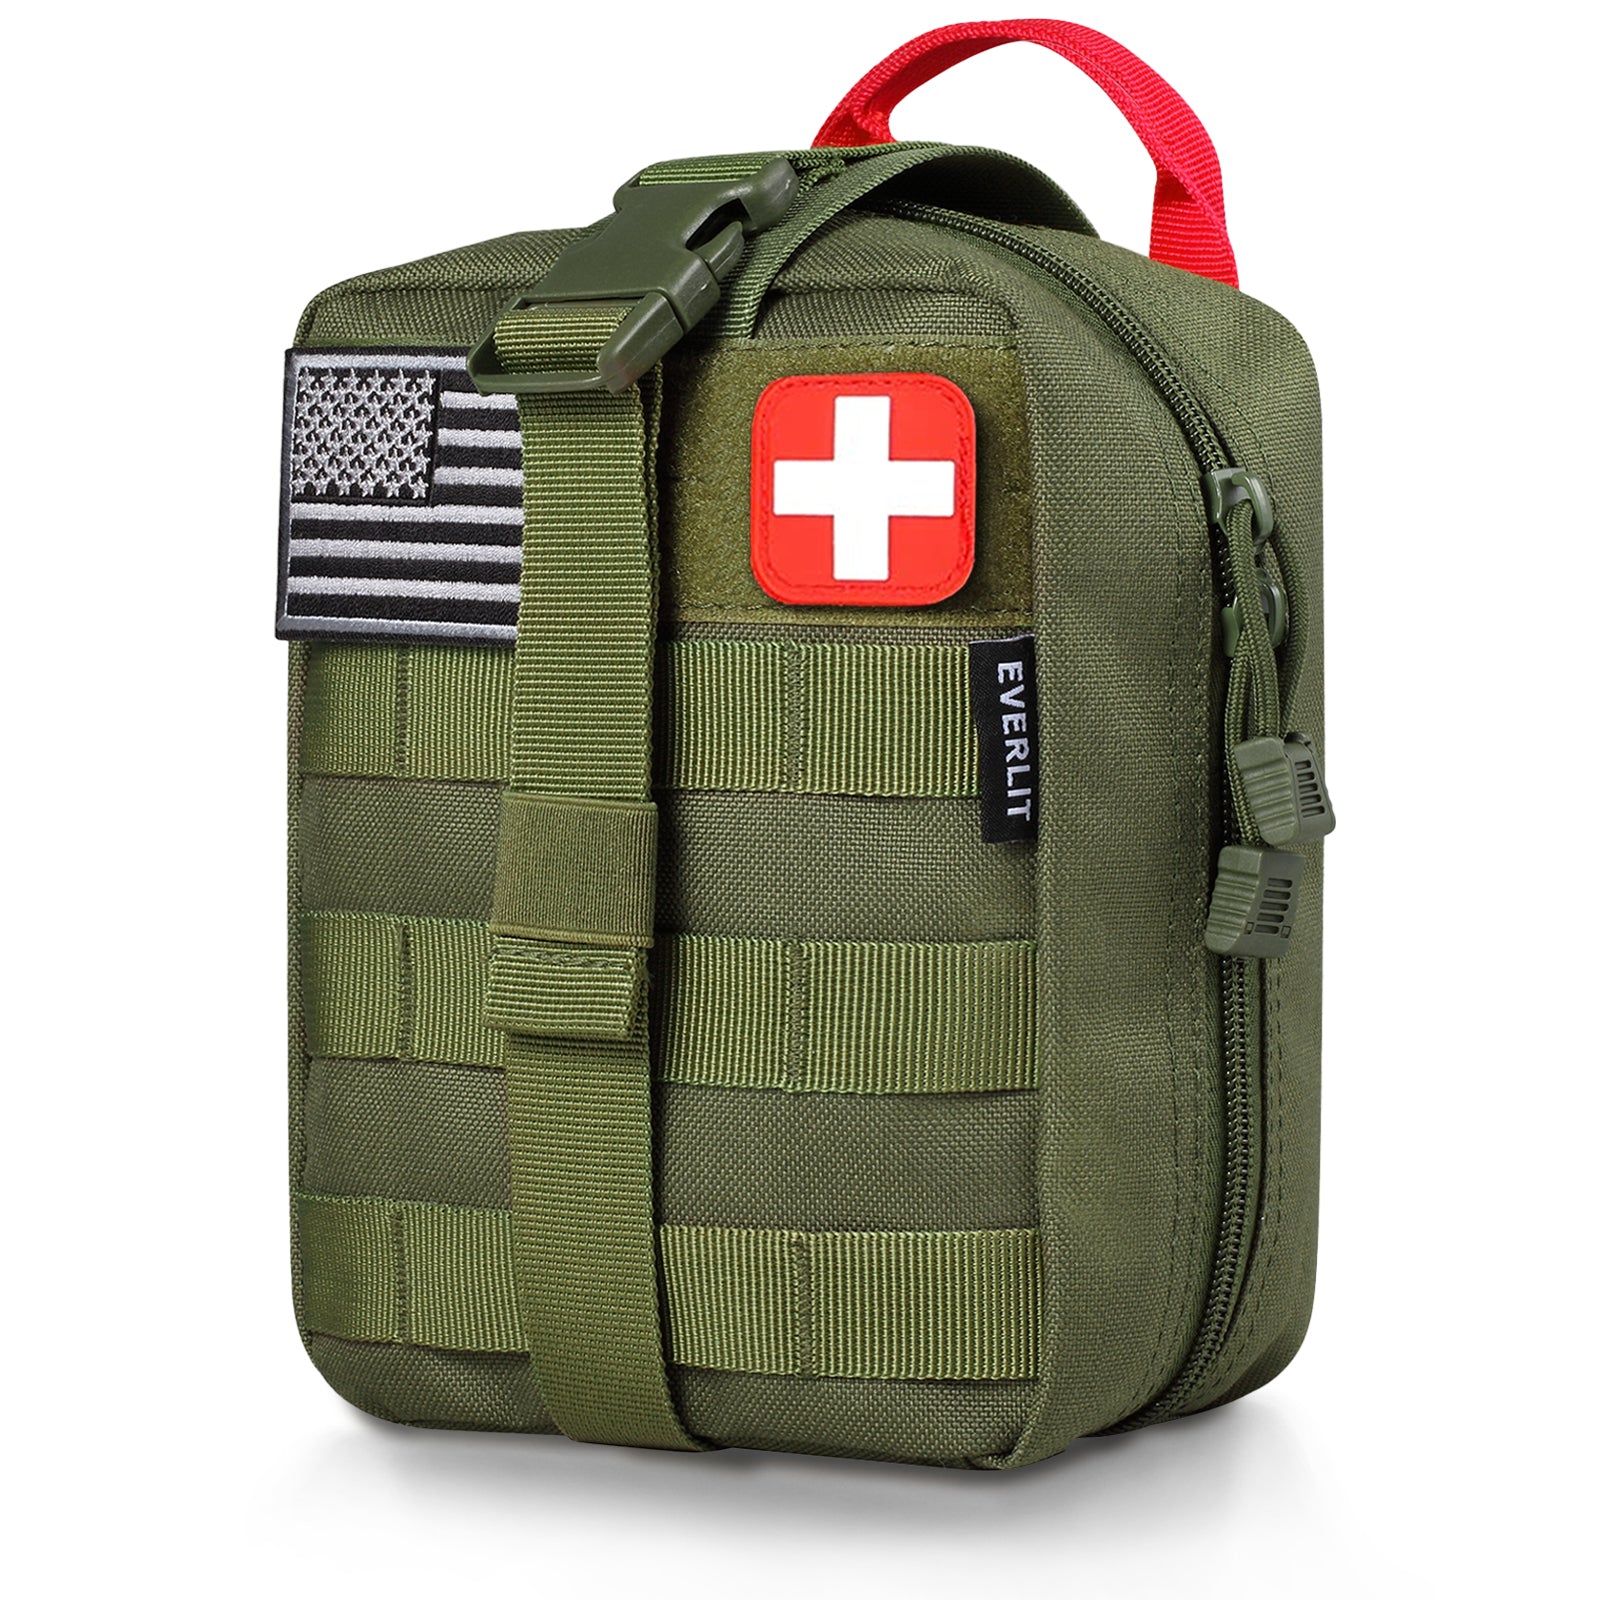 ESSENTIAL<br> SURVIVAL FIRST AID KIT